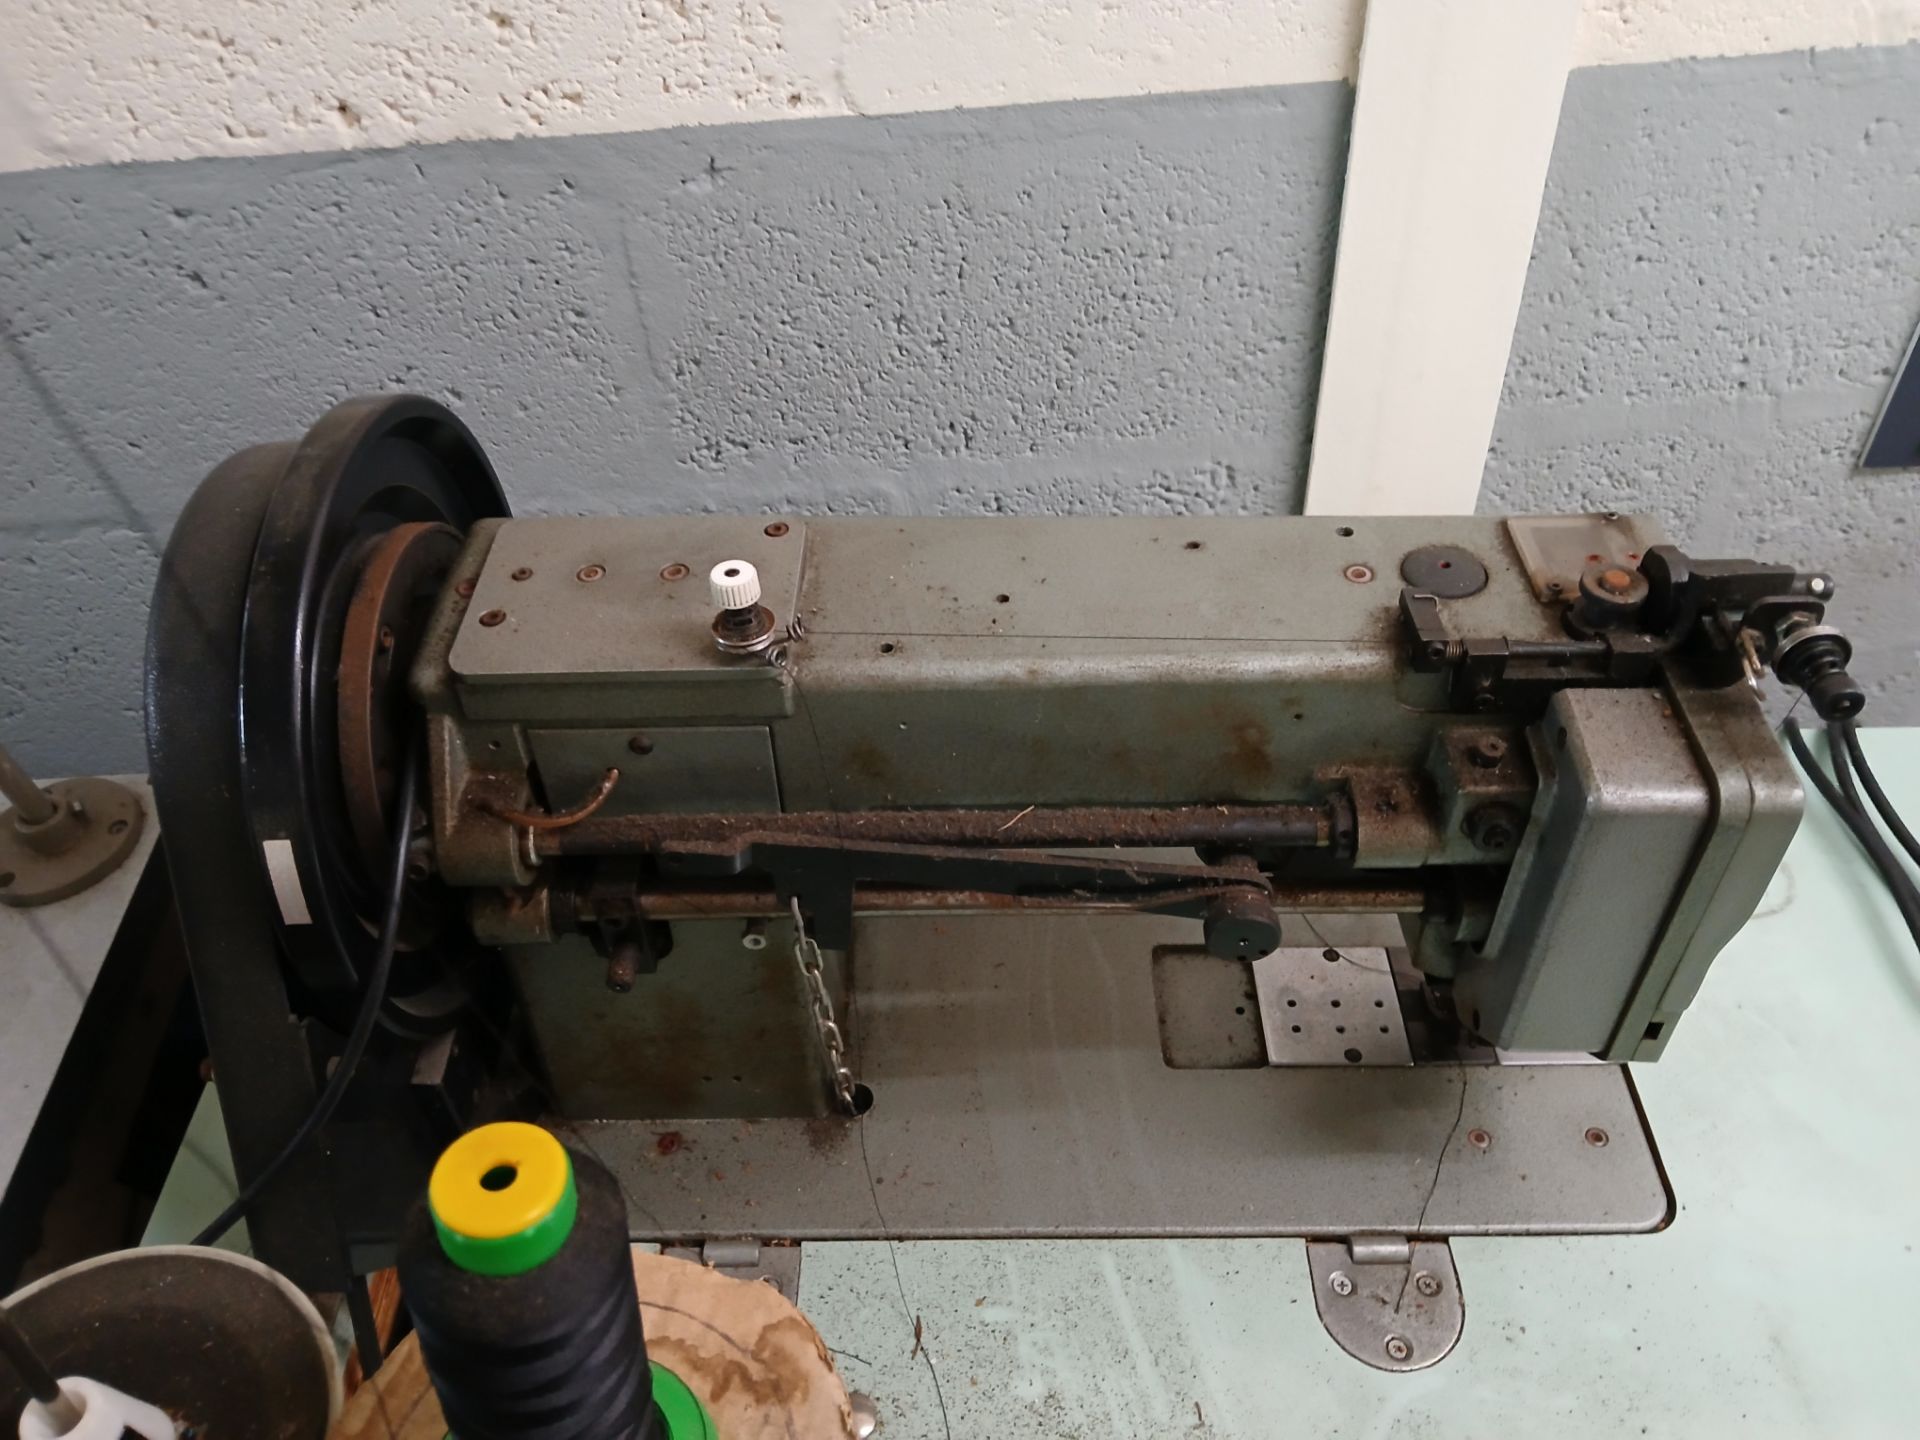 GF204-370 heavy duty sewing machine 415v as lotted - Image 2 of 3